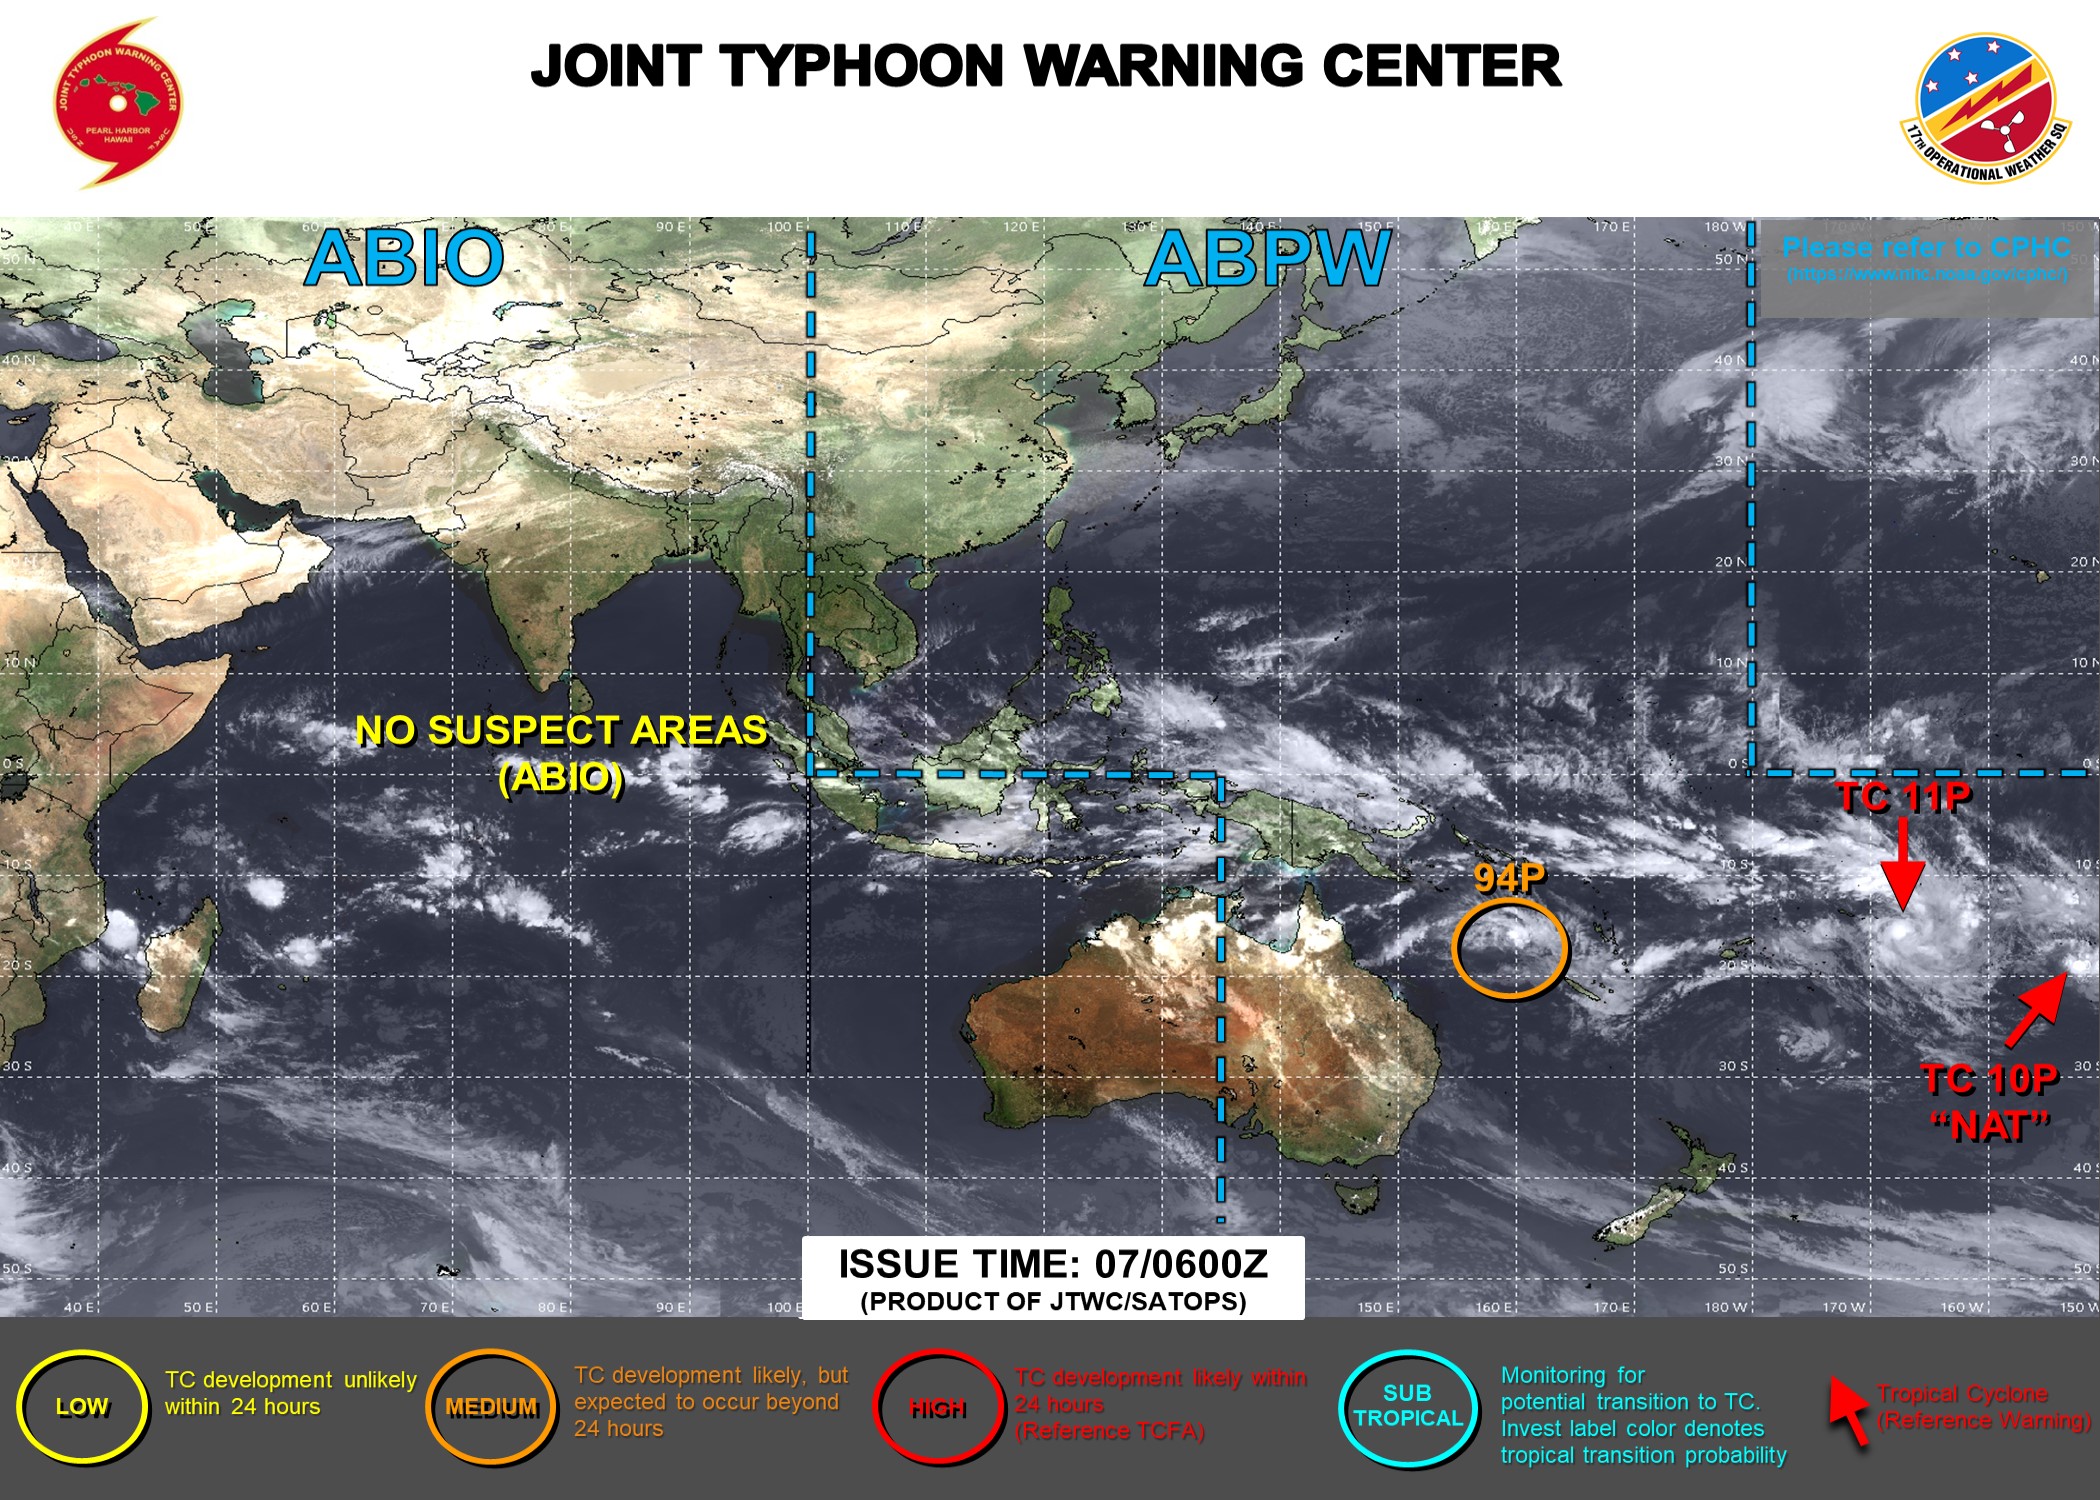 JTWC IS ISSUING 6HOURLY WARNINGS AND 3HOURLY SATELLITE BULLETINS ON TC 11P. 12HOURLY WARNINGS AND 3HOURLY SATELLITE BULLETINS ARE ISSUED ON  TC 10P. 3HOURLY SATELLITE BULLETINS ARE ISSUED ON INVEST 94P.